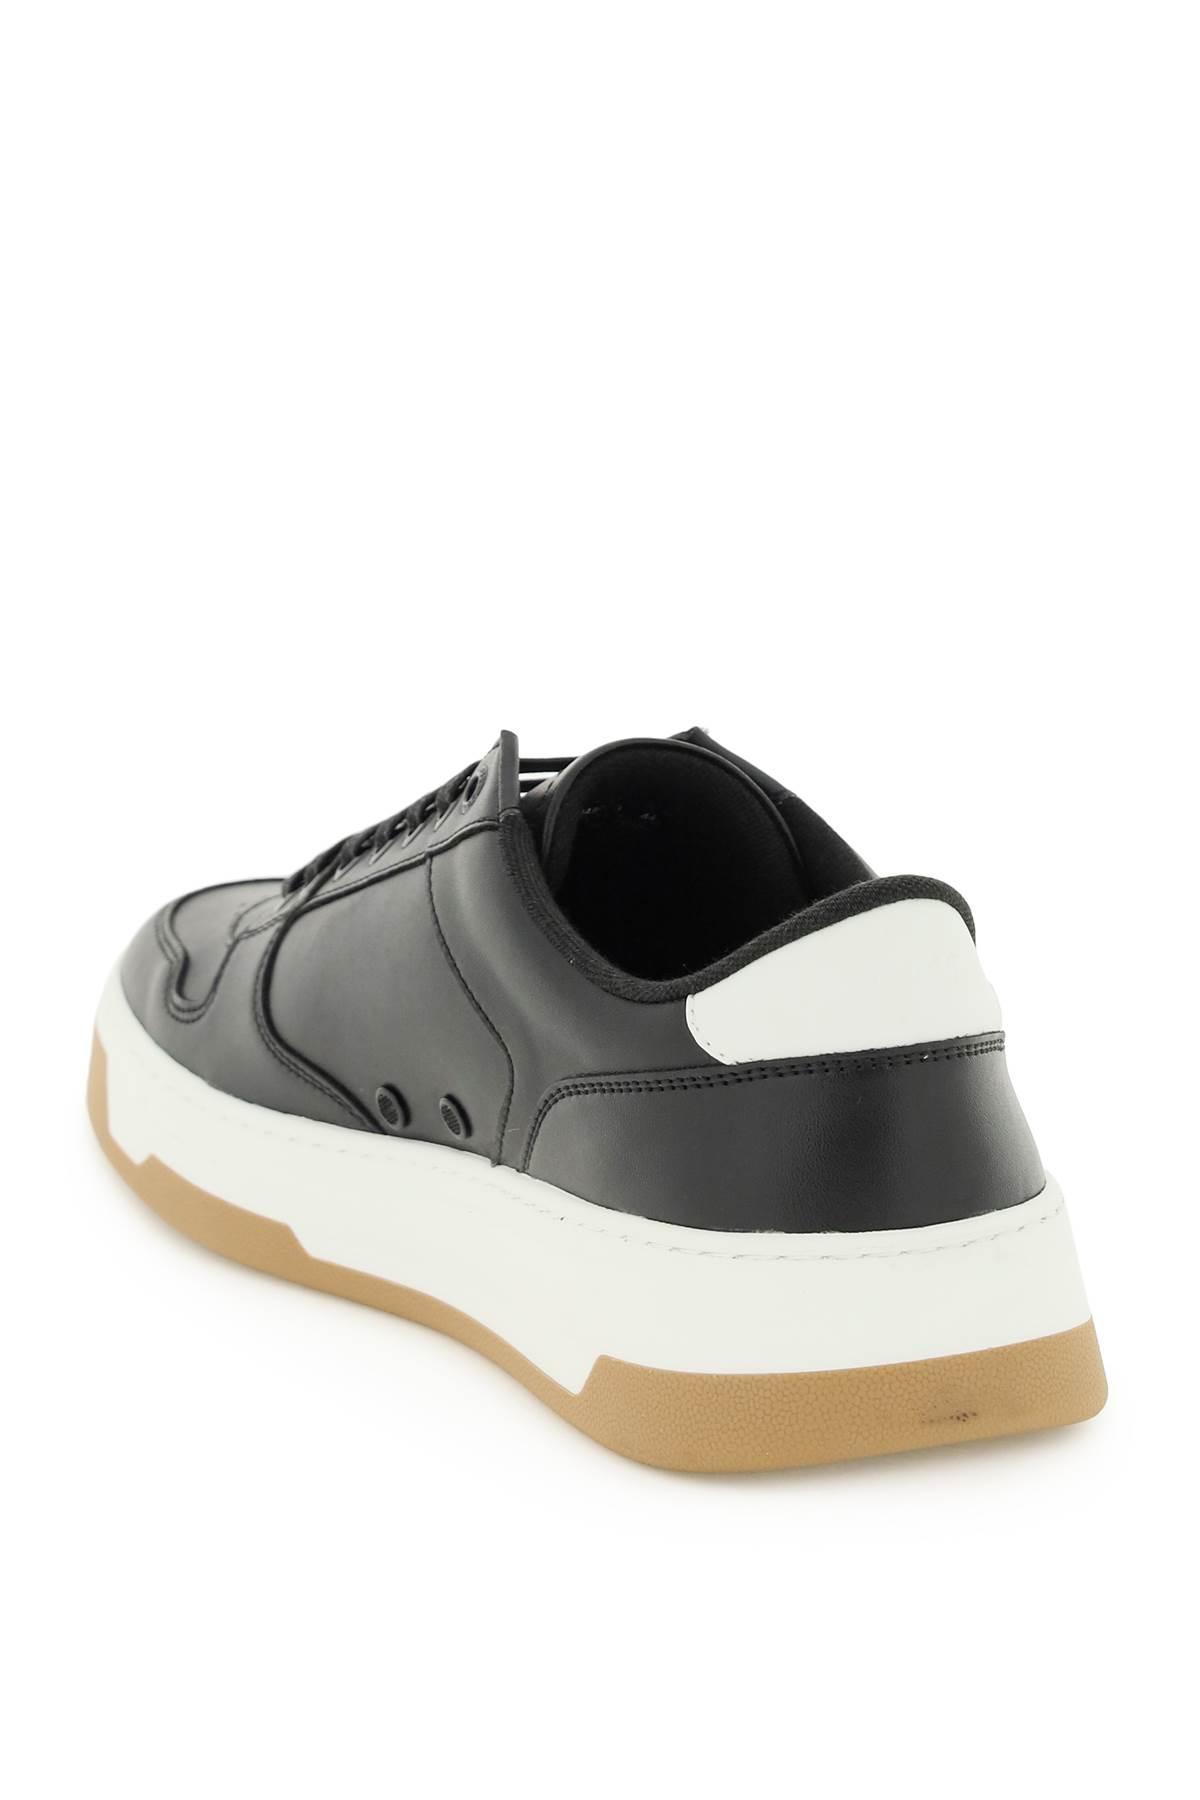 BOSS by HUGO BOSS 'baltimore' Faux Leather Sneakers in Black for Men | Lyst